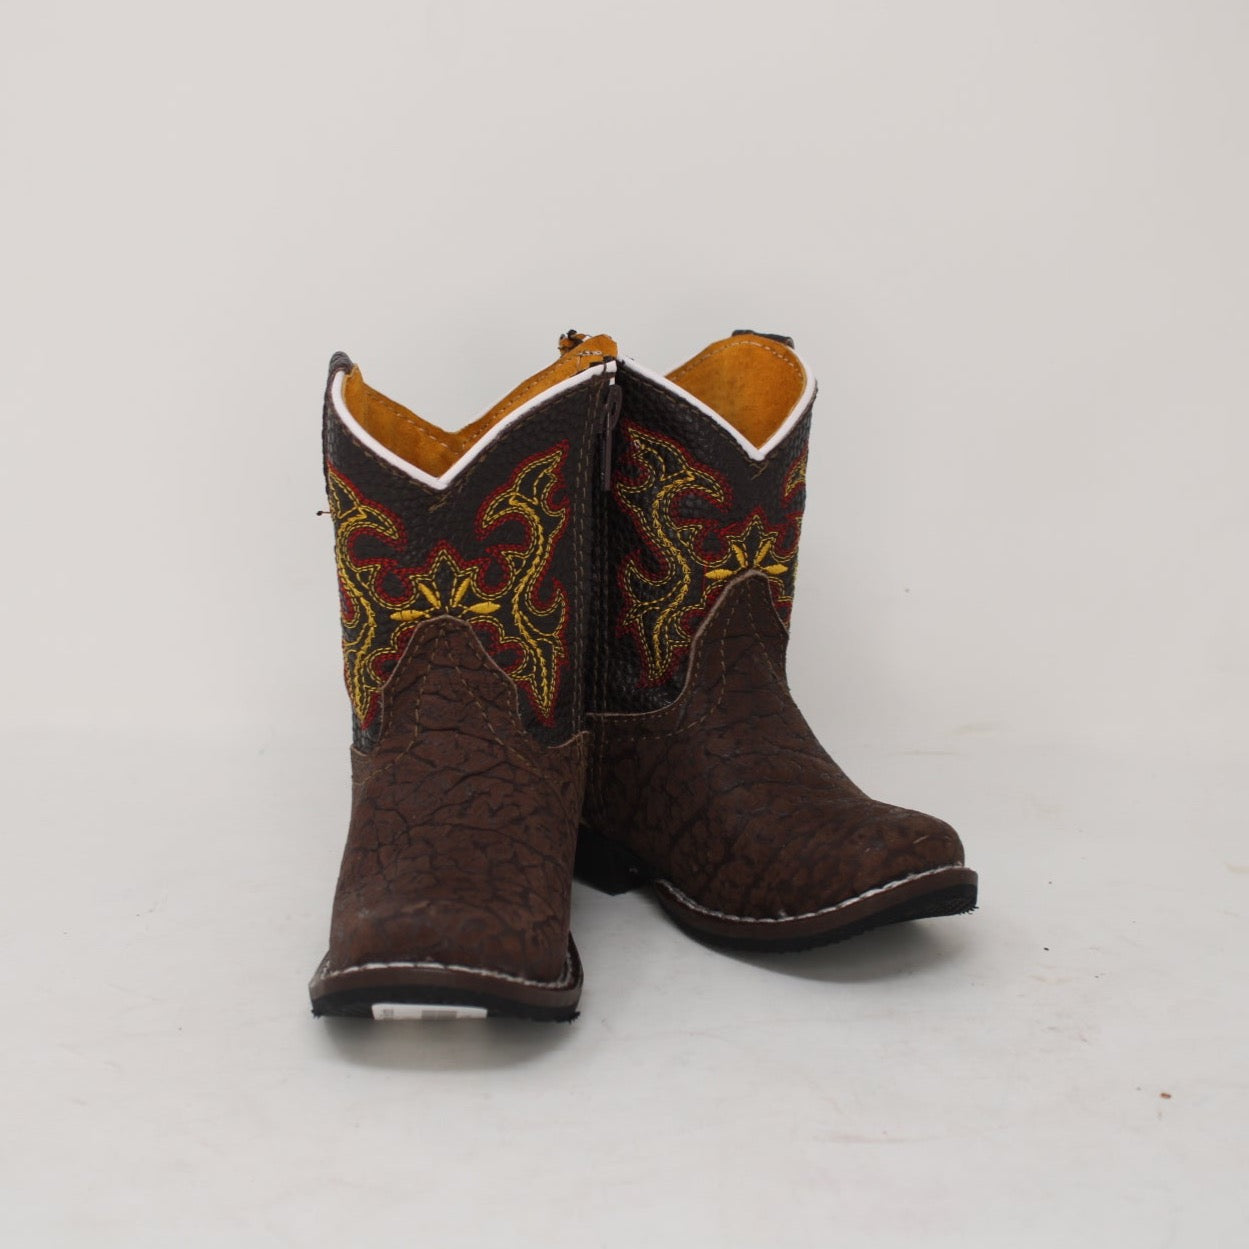 "Webster" Baby Boots